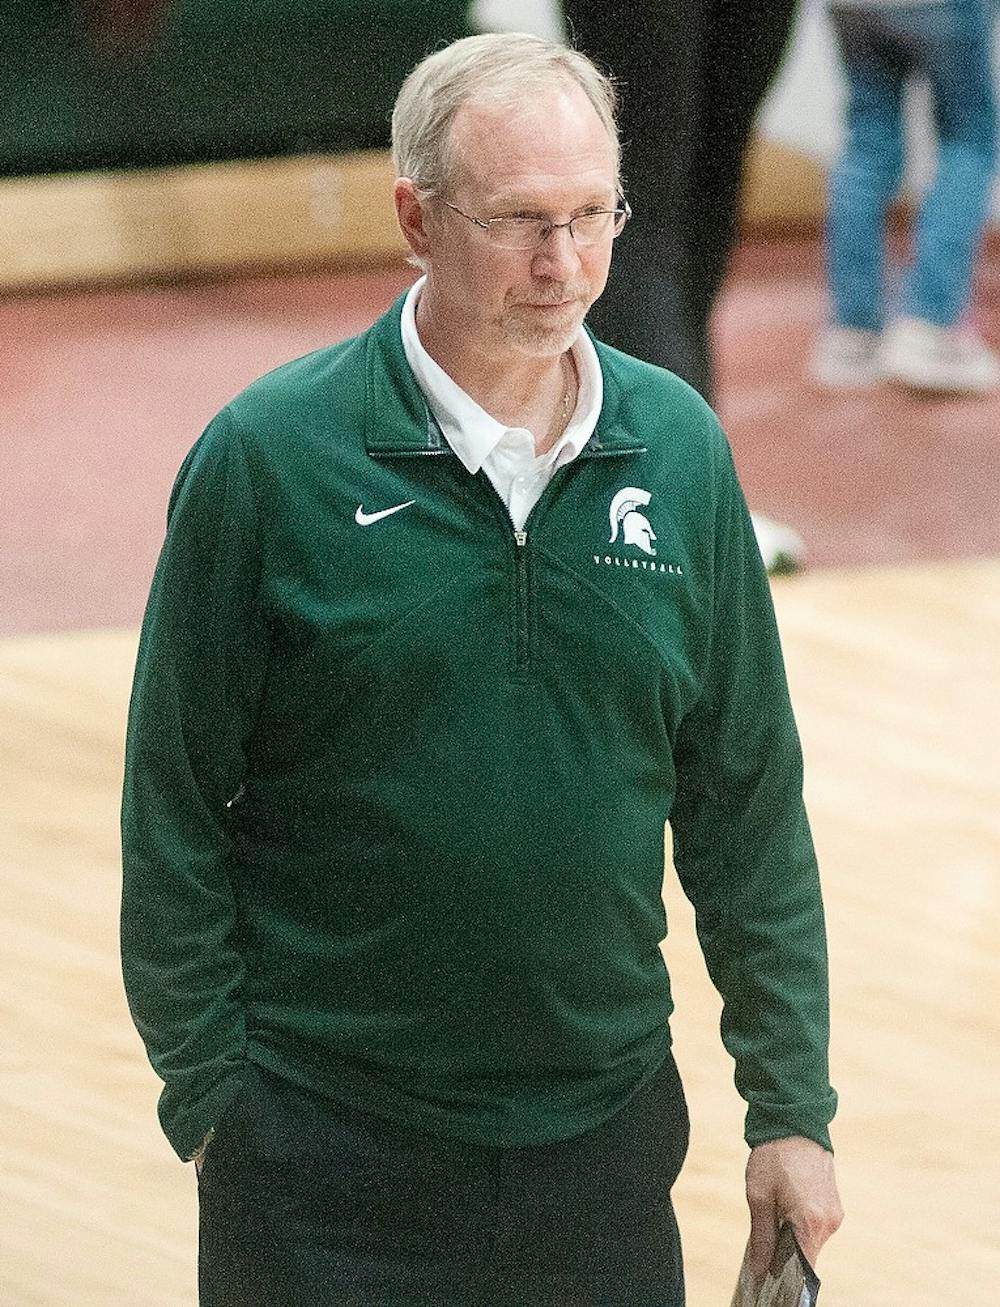 Associate head coach Russ Carney watches the Michigan State University versus Iowa volleyball game from the sidelines of Jenison Field House on Friday, Nov. 2, 2012. MSU won the game in three straight sets. Danyelle Morrow/The State News